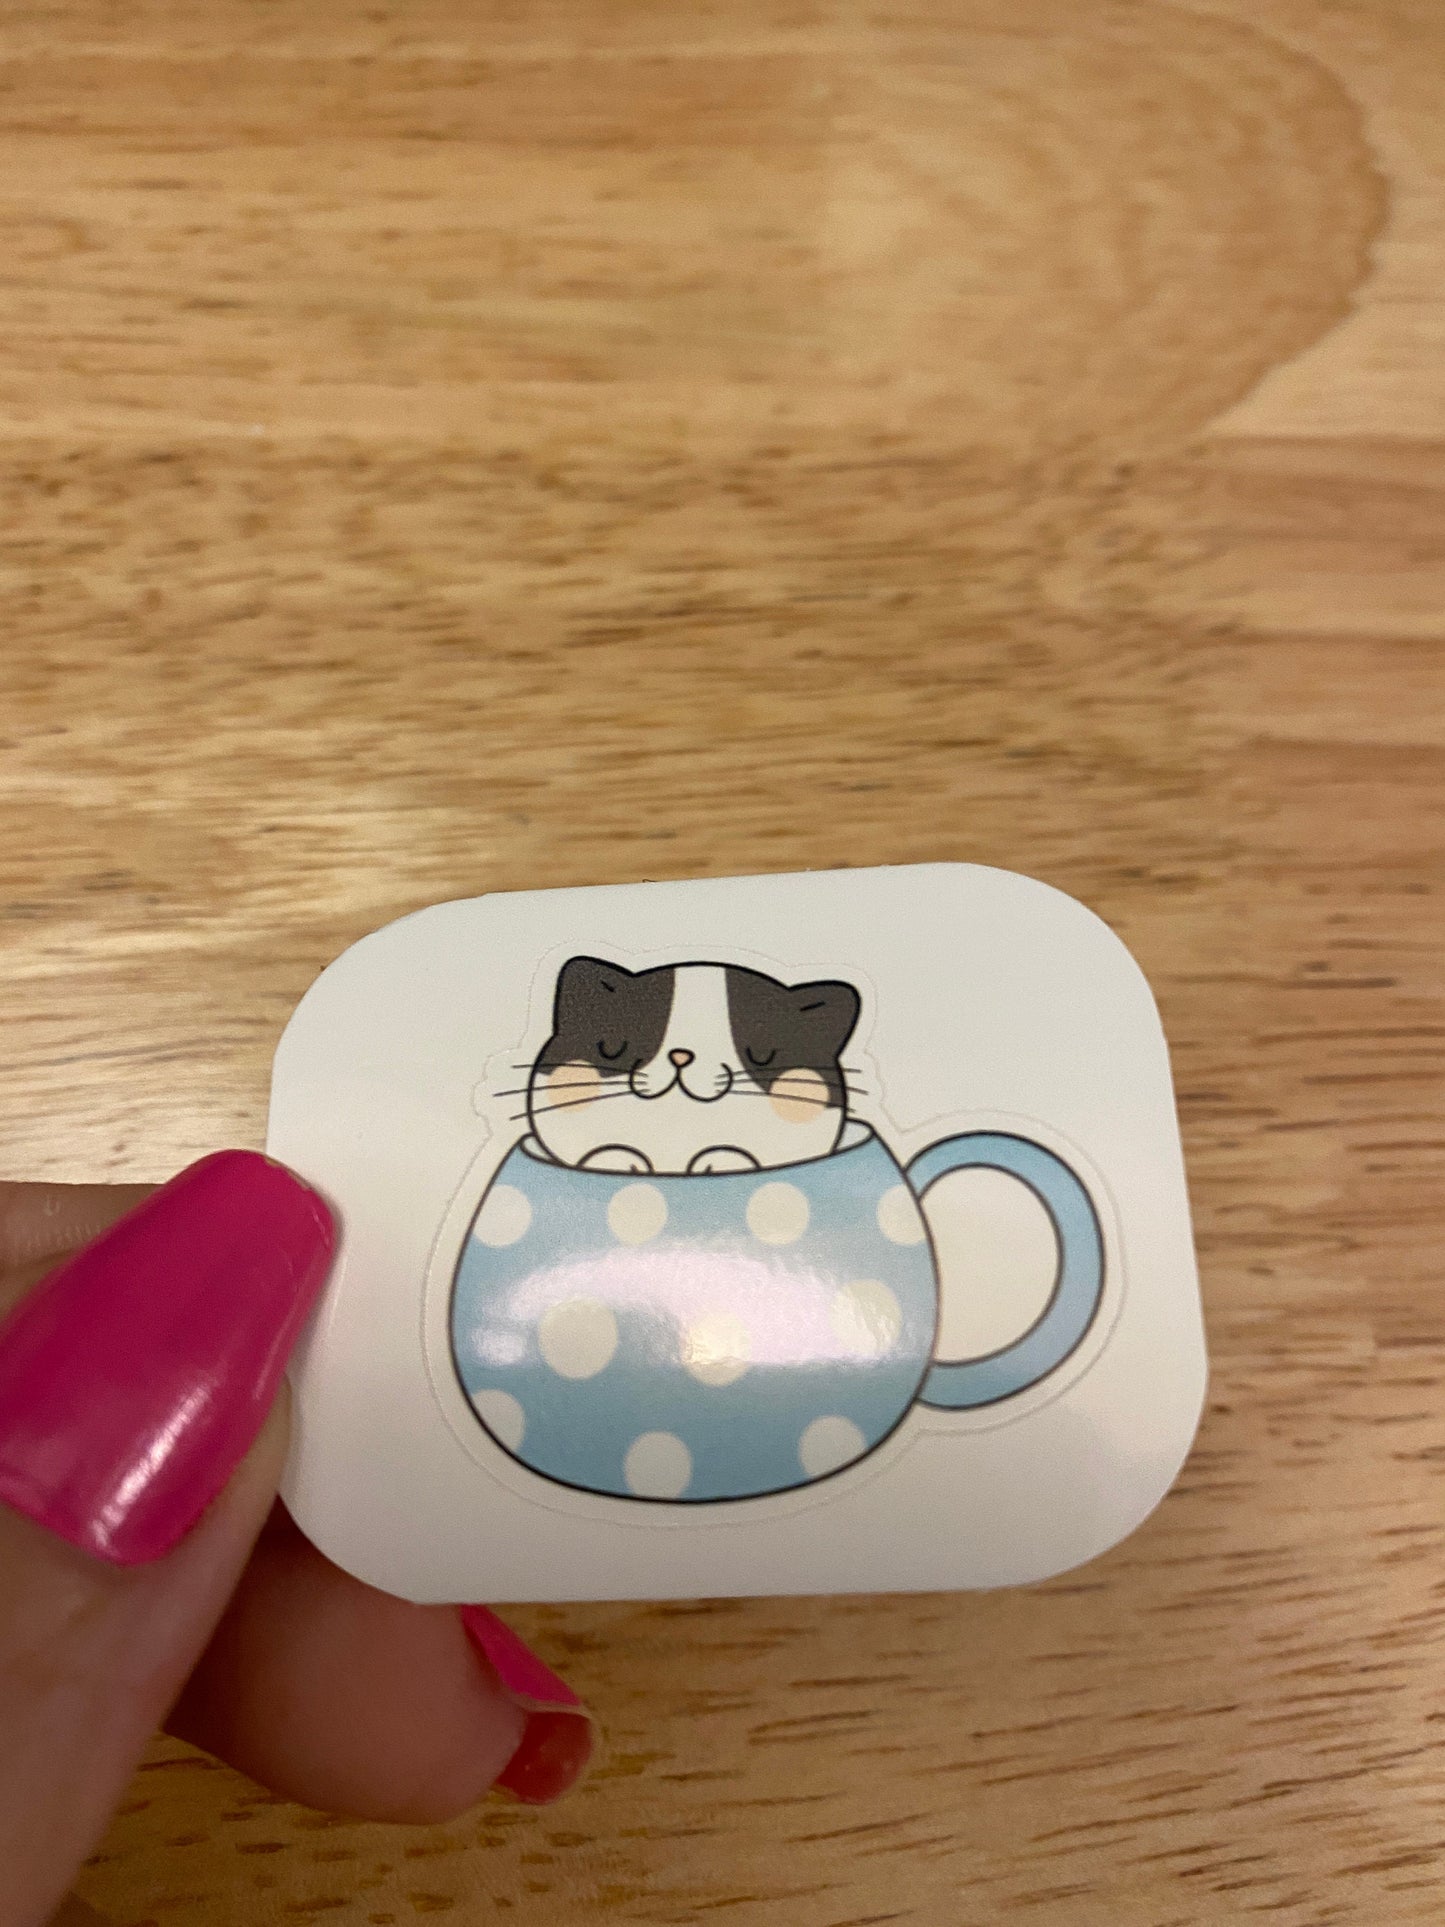 Blue Teacup Kitty STICKER, Cat in cup Sticker, Holographic option, Cute Cat Design Sticker, Coffee Cup cat sticker